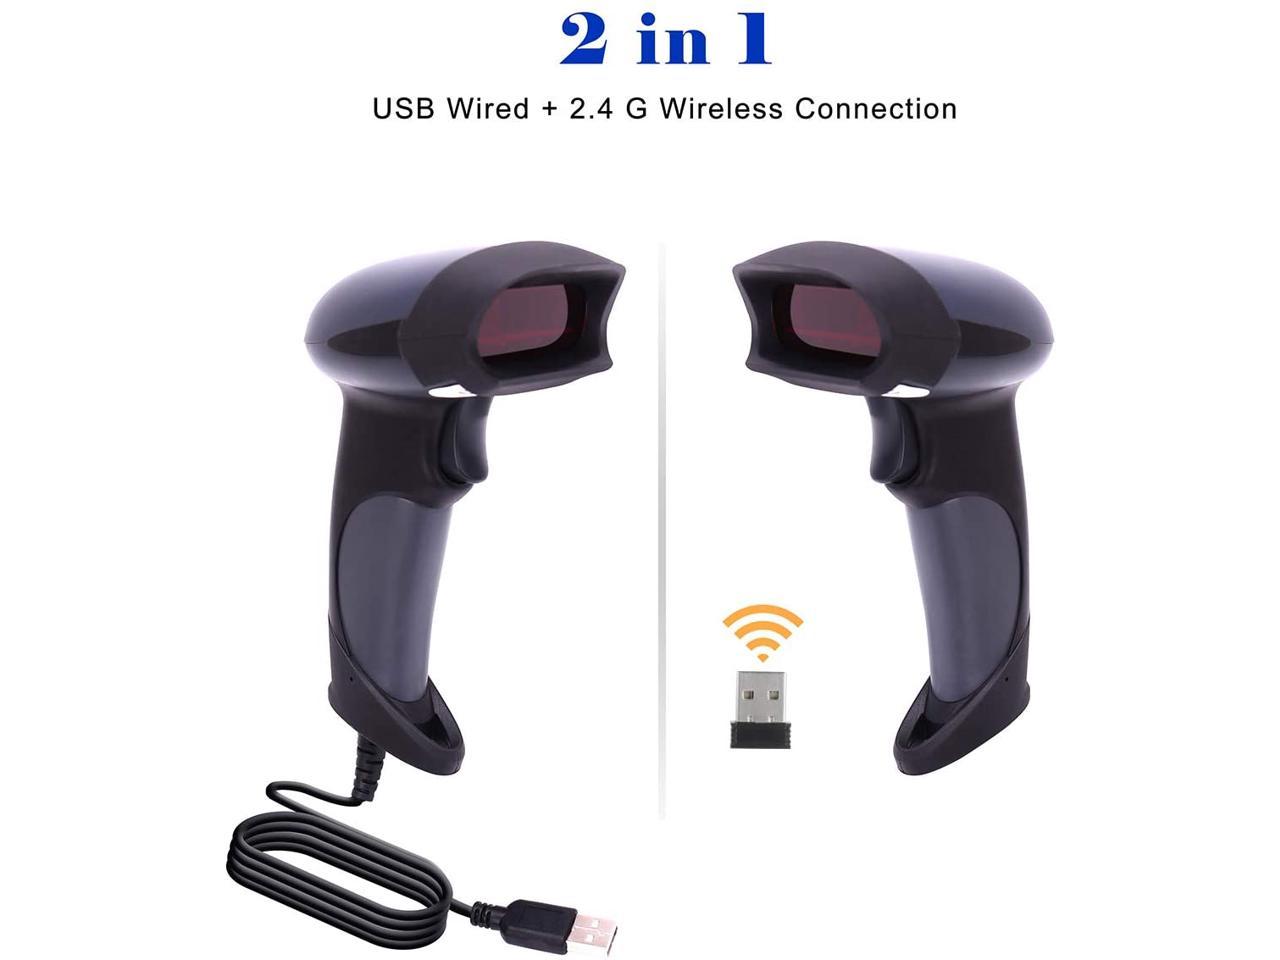 Wireless Handheld Barcode Scanner BEVA 2-in-1 Wired Bar Code Reader 2.4GHz Wireless & USB 2.0 Wired Handheld Bar Code Scanner 1D Laser Barcode Reader for POS PC Laptop and Computer 